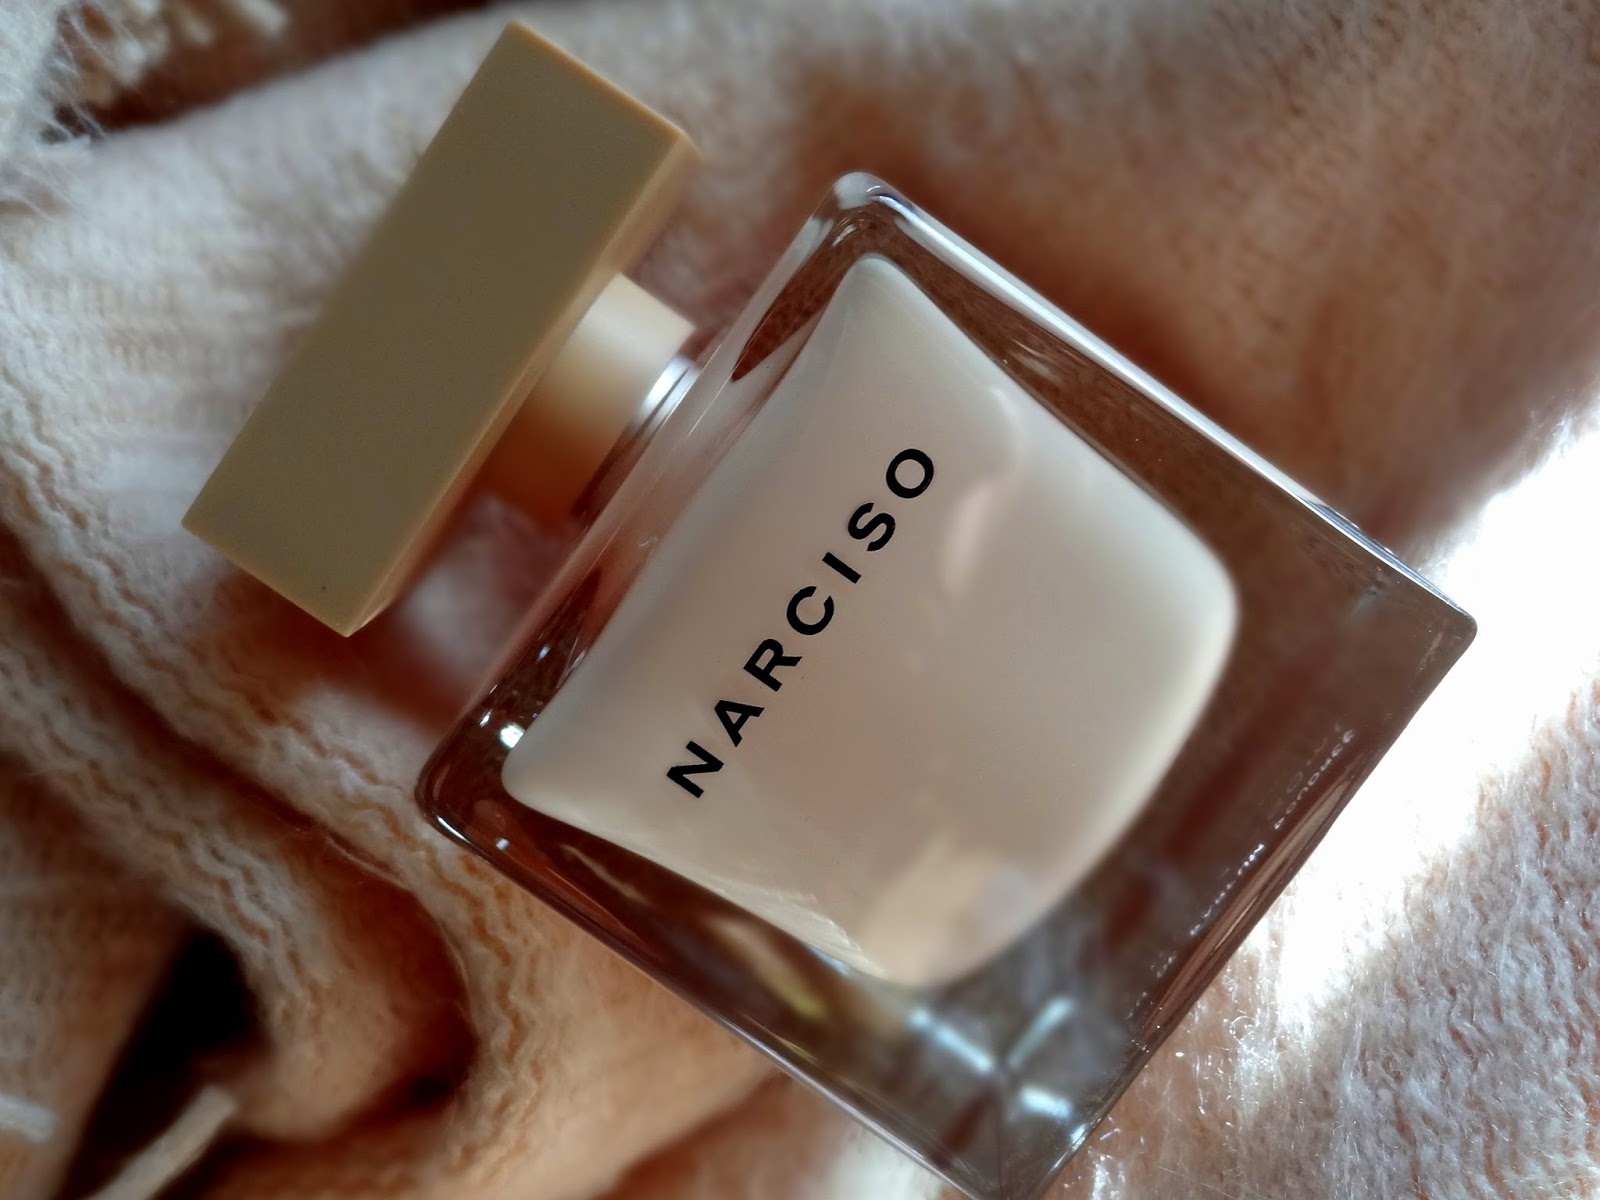 Makeup, Beauty and More: NARCISO Eau de Parfum Poudree by Narciso Rodriguez